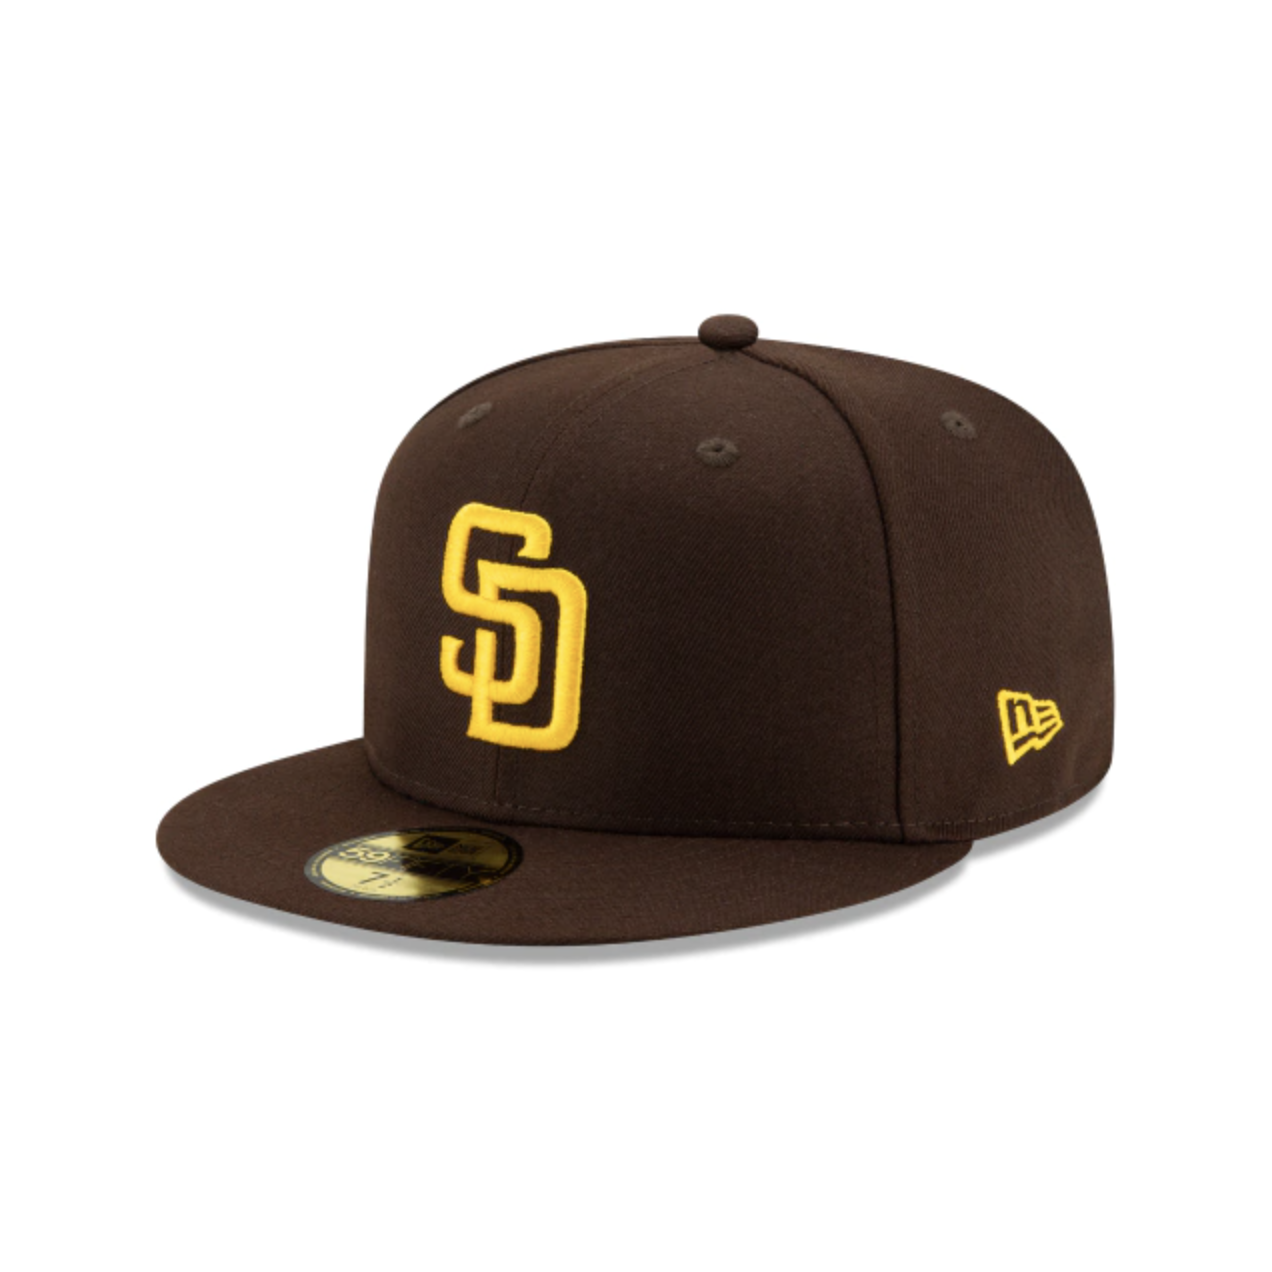 Official New Era San Diego Padres MLB Walnut 59FIFTY Fitted Cap B8326286   New Era Cap Portugal